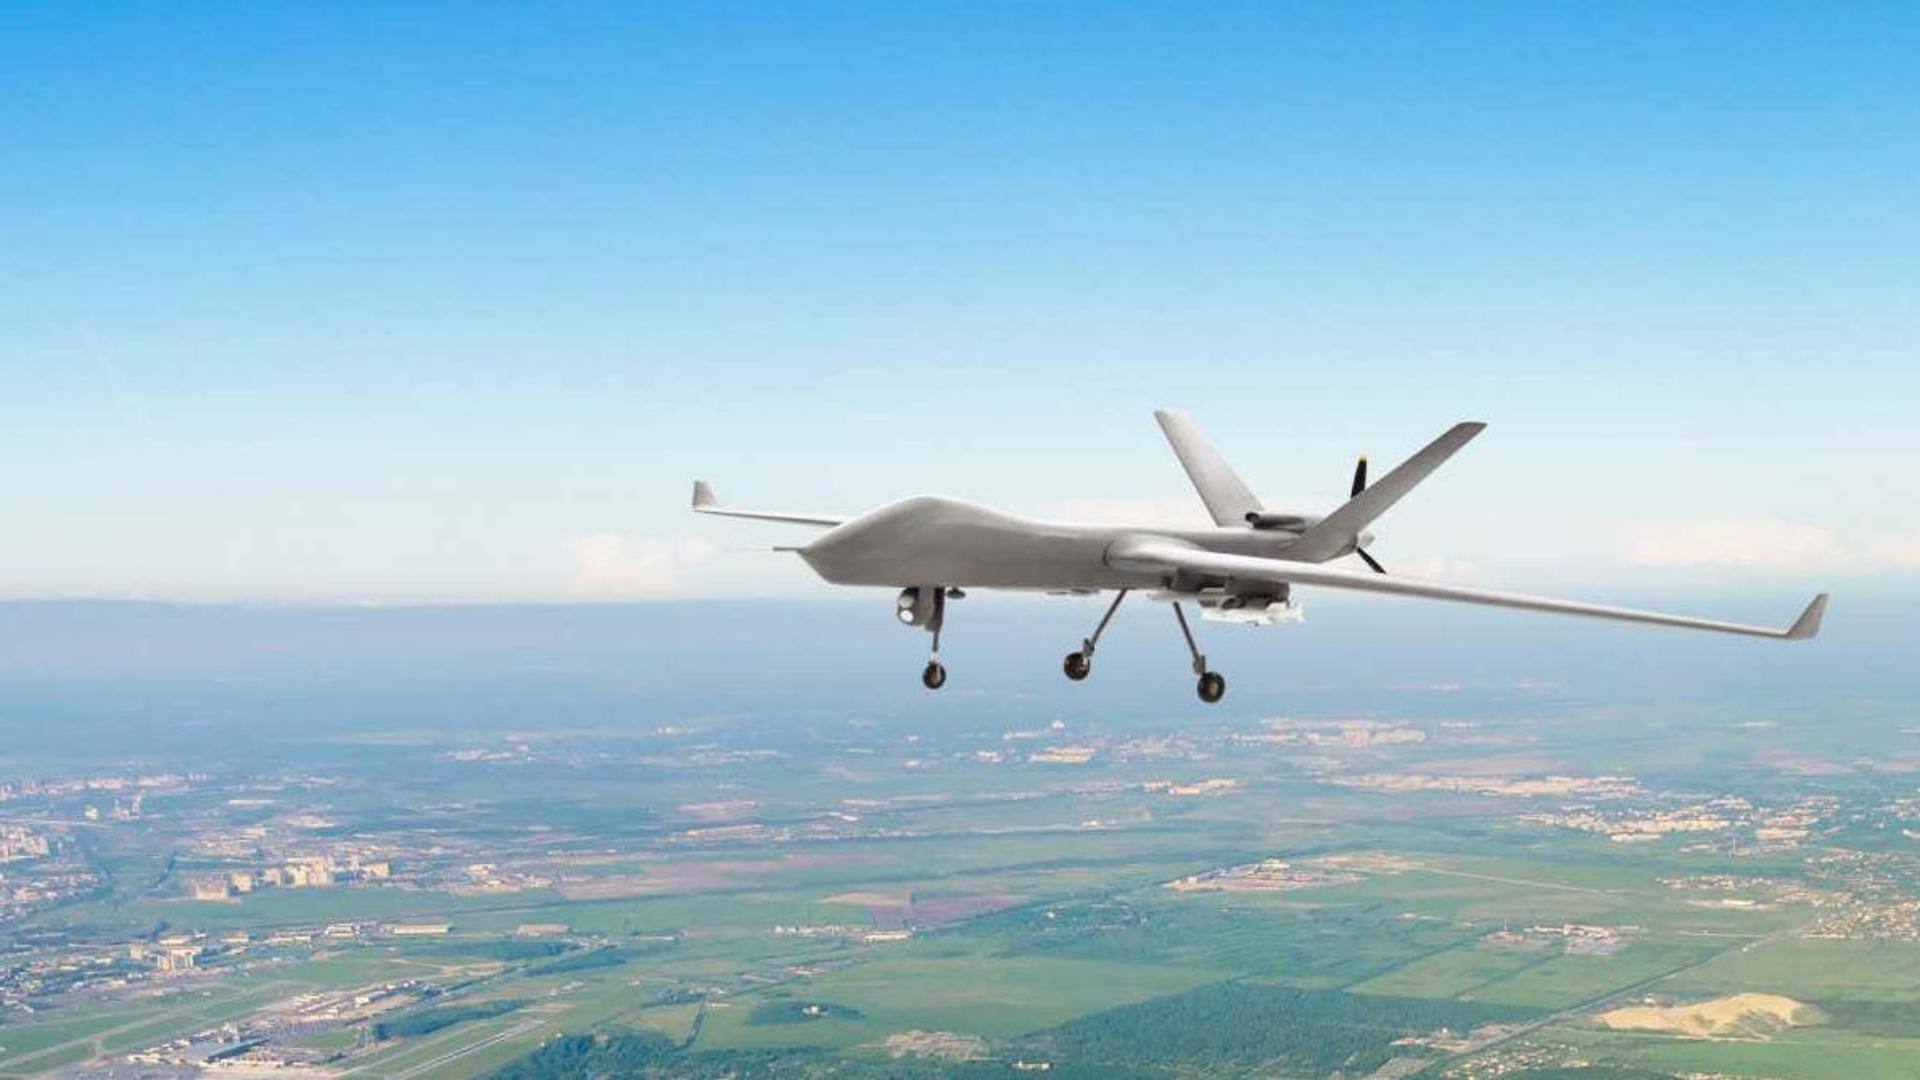 AI-controlled drone 'kills' operator during simulation test: What went wrong